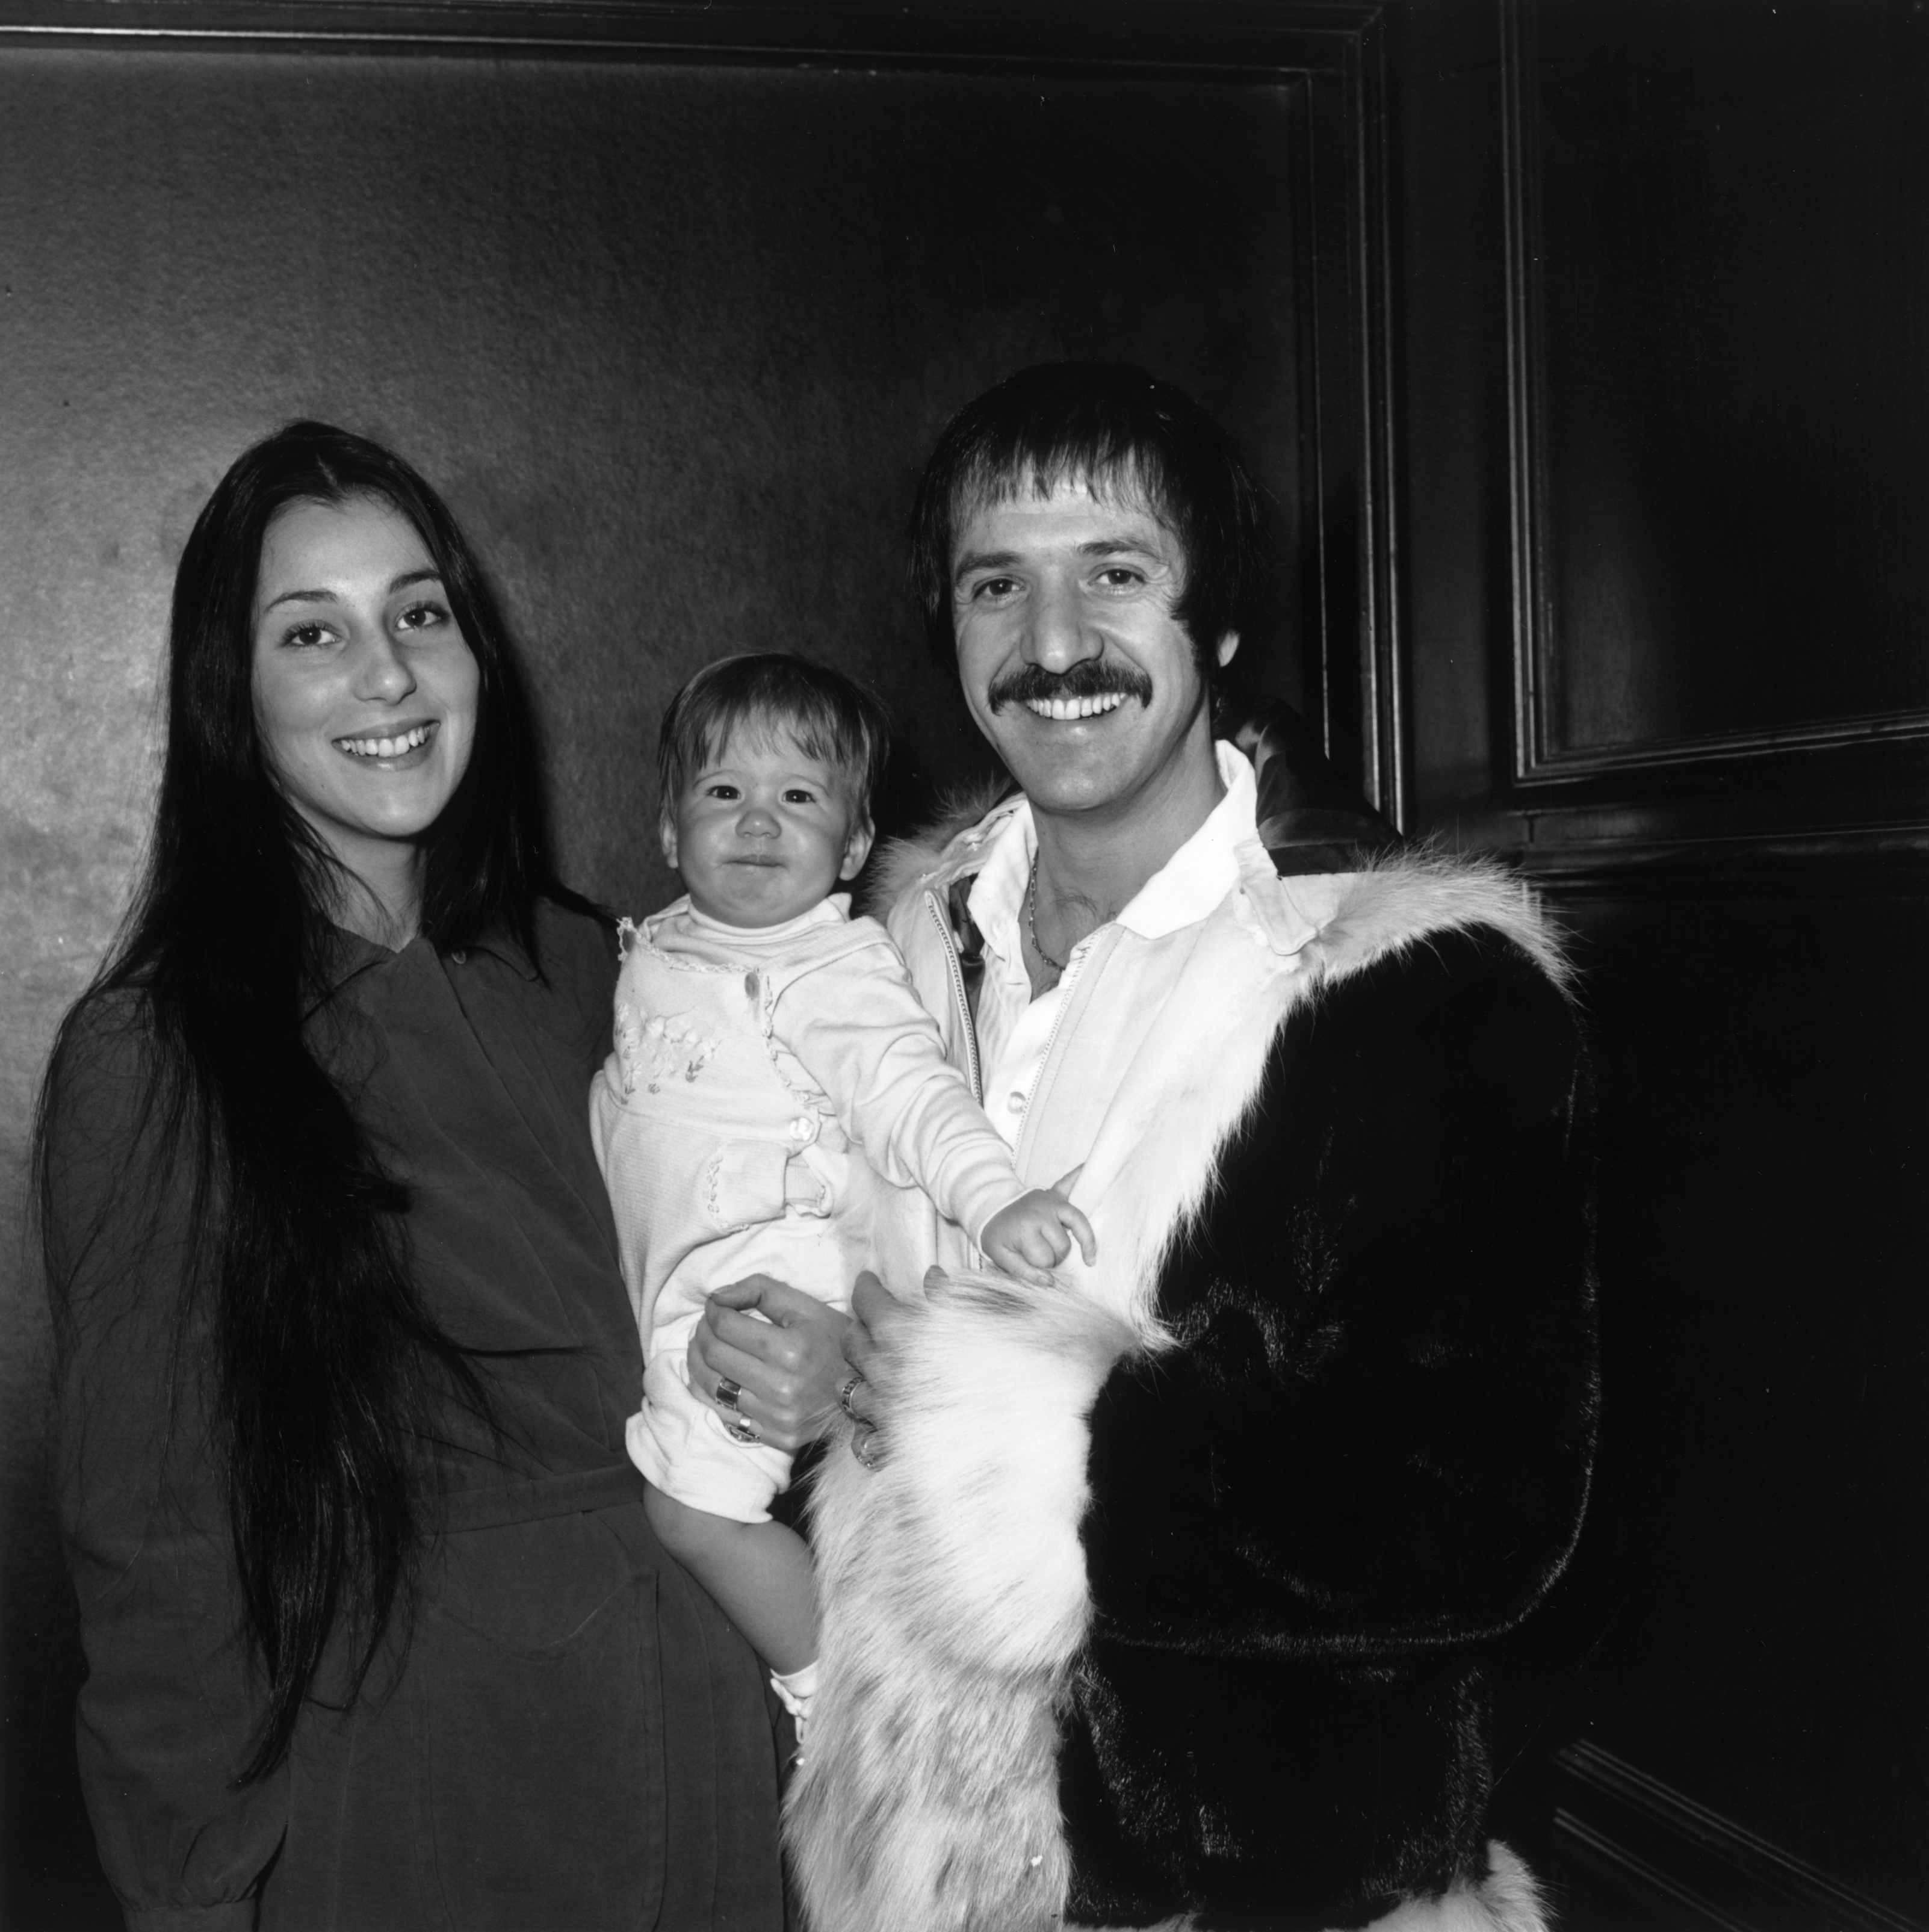 Cher and Sonny Bonowith their daughter Chastity in Las Vegas, Nevada | Source: Getty Images